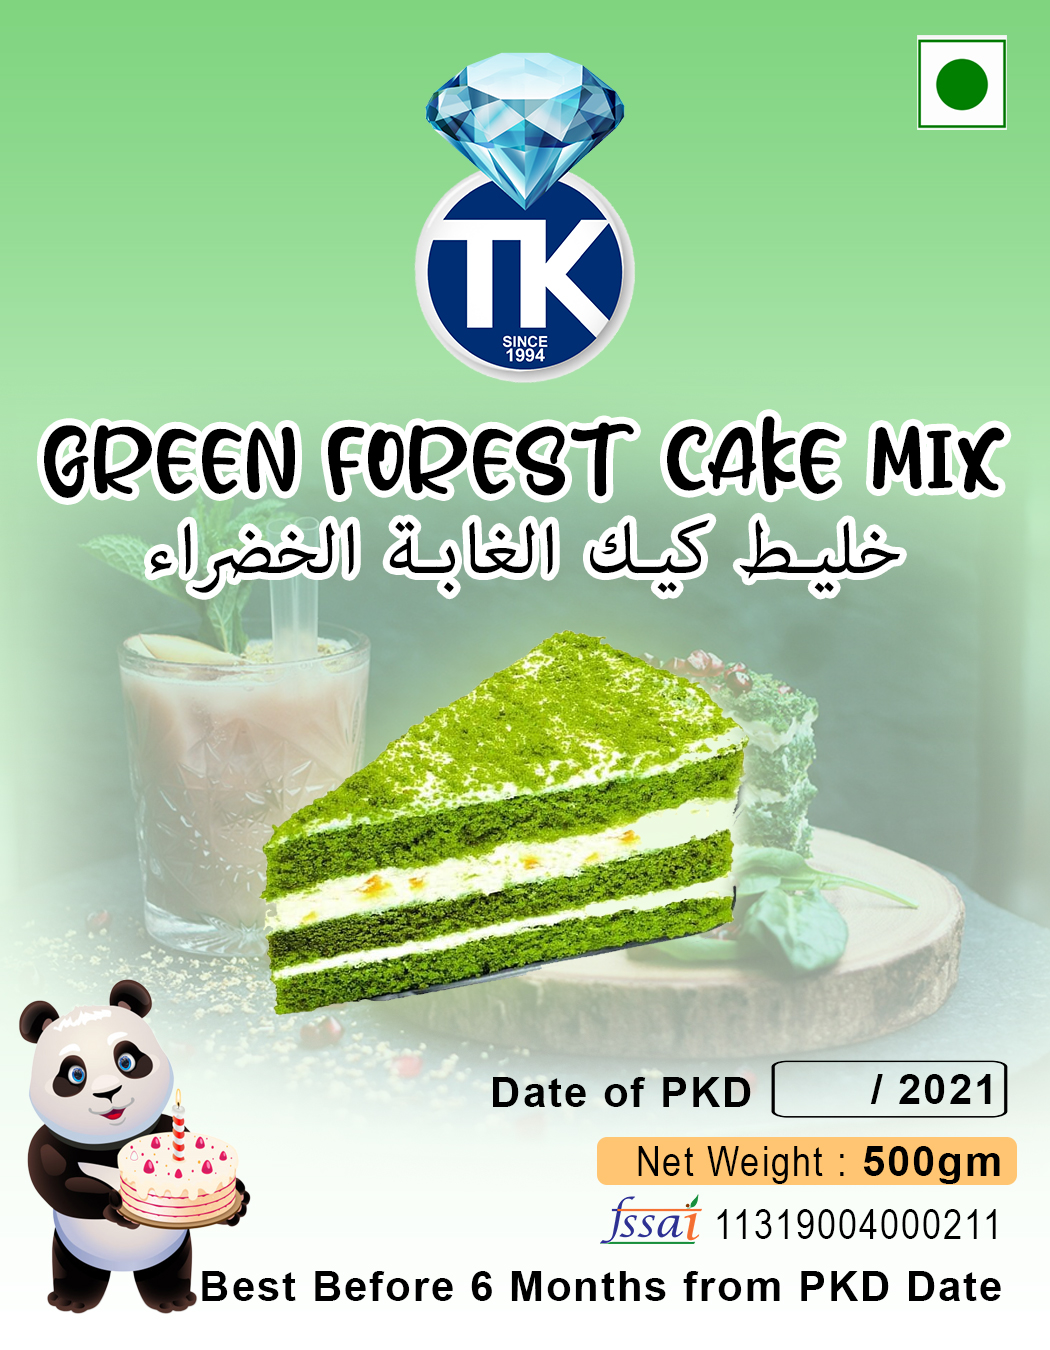 Green Forest ... delivered @... - Siji's Passion Cakes | Facebook